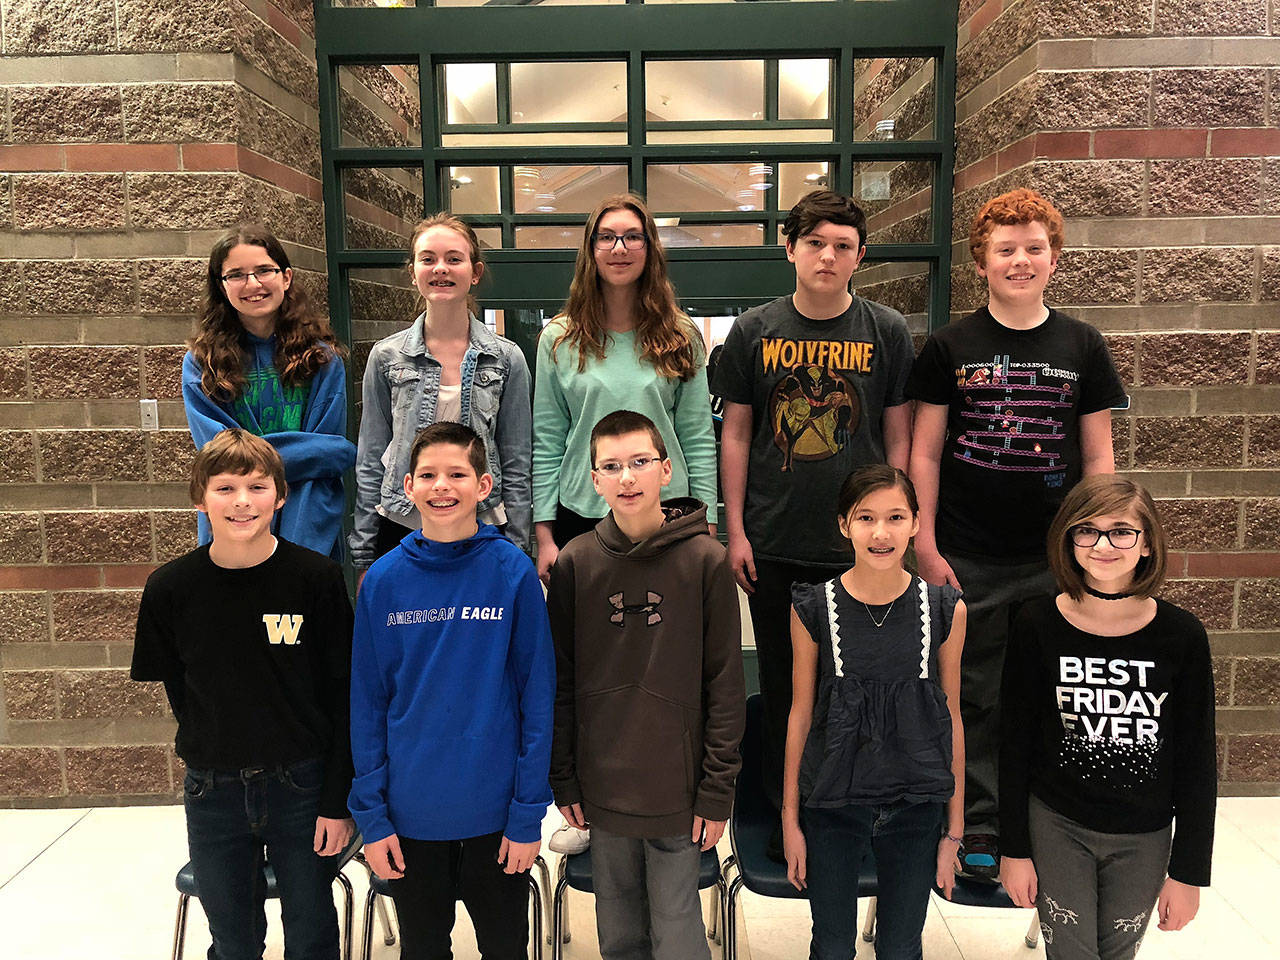 Some of Sequim Middle School’s science “Catalysts” for Term 2 include (back row, from left) Karlie Viada, Phoebe Sampson, Briauna Saghafi, Desmond Tippins and Jobe Kirner, with (front row, from left) Zack Thompson, Brett Mote, Burke Henderson, Danika Chen and Lexi Treece. Submitted photo